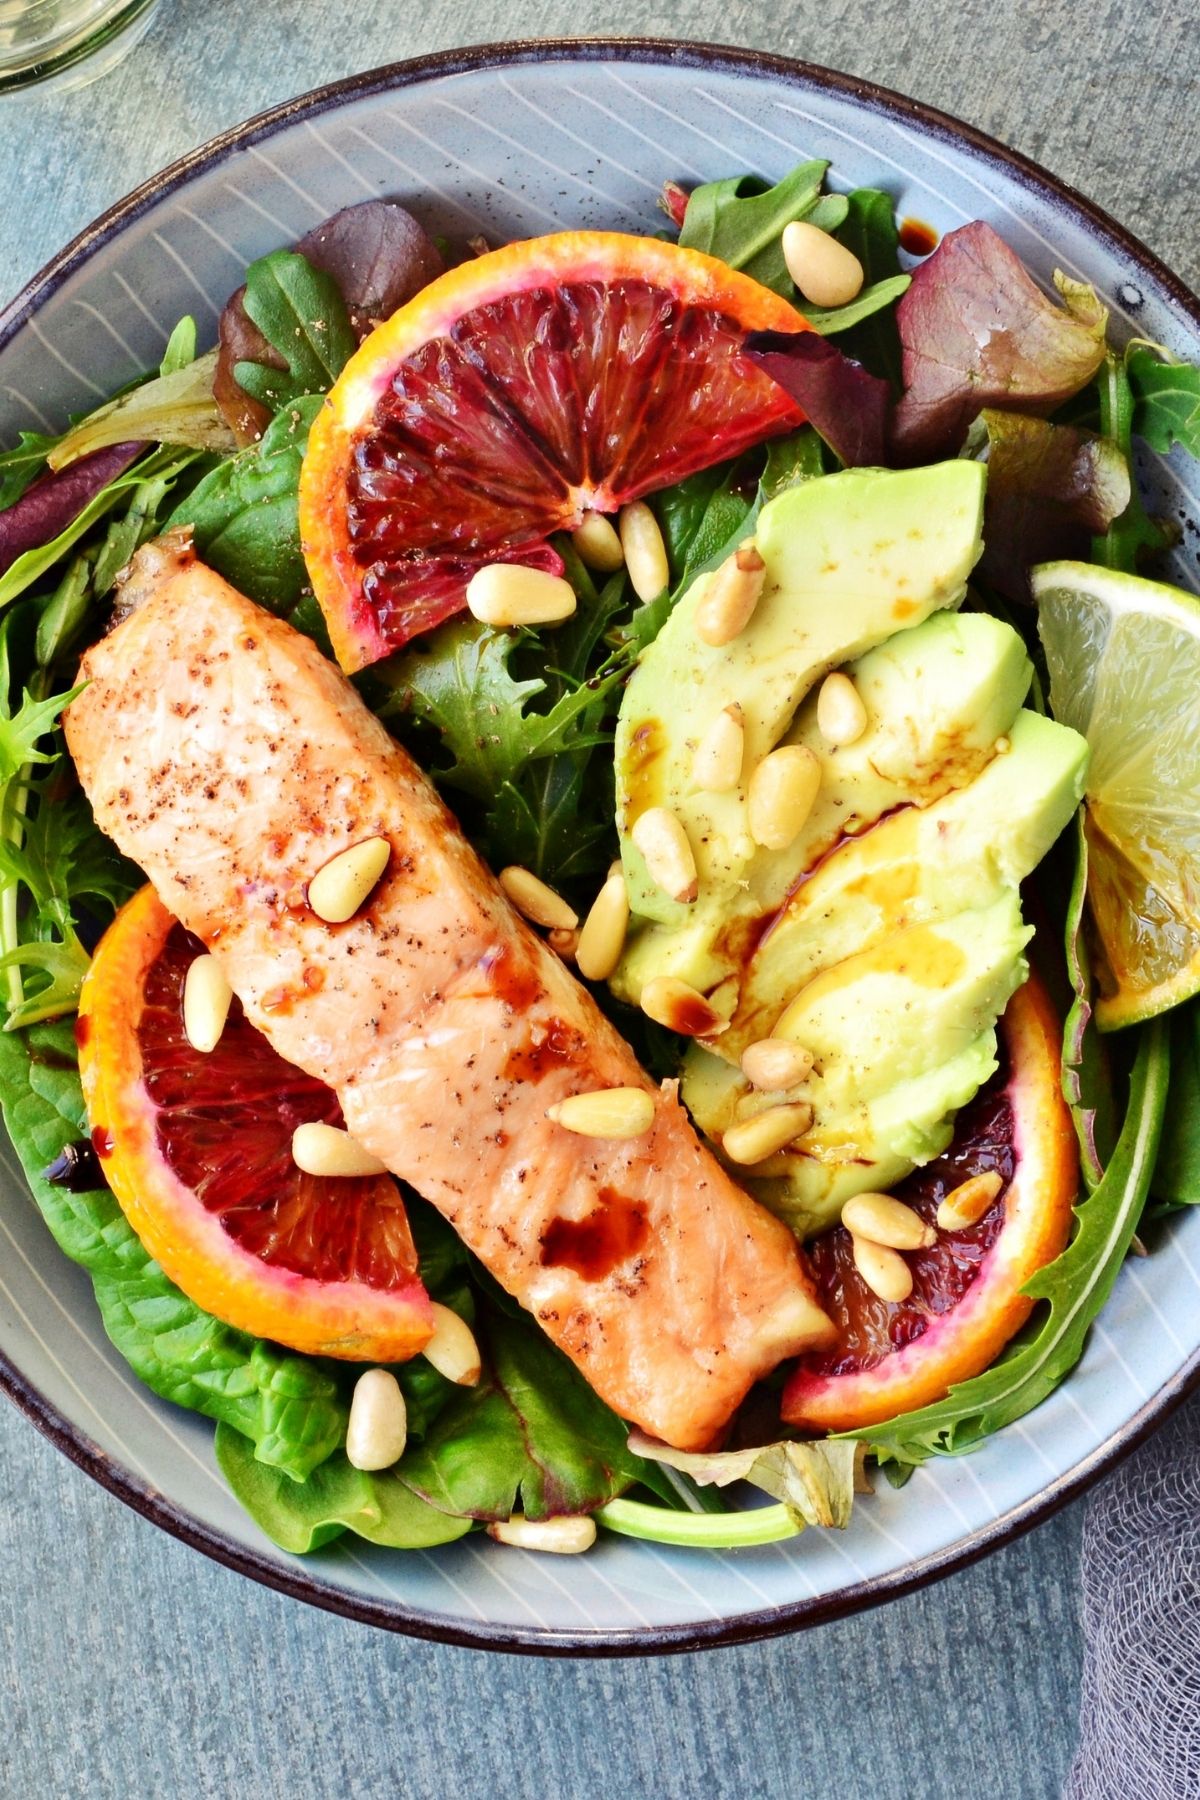 paleo meal with fruit, fish, avocado, and nuts.